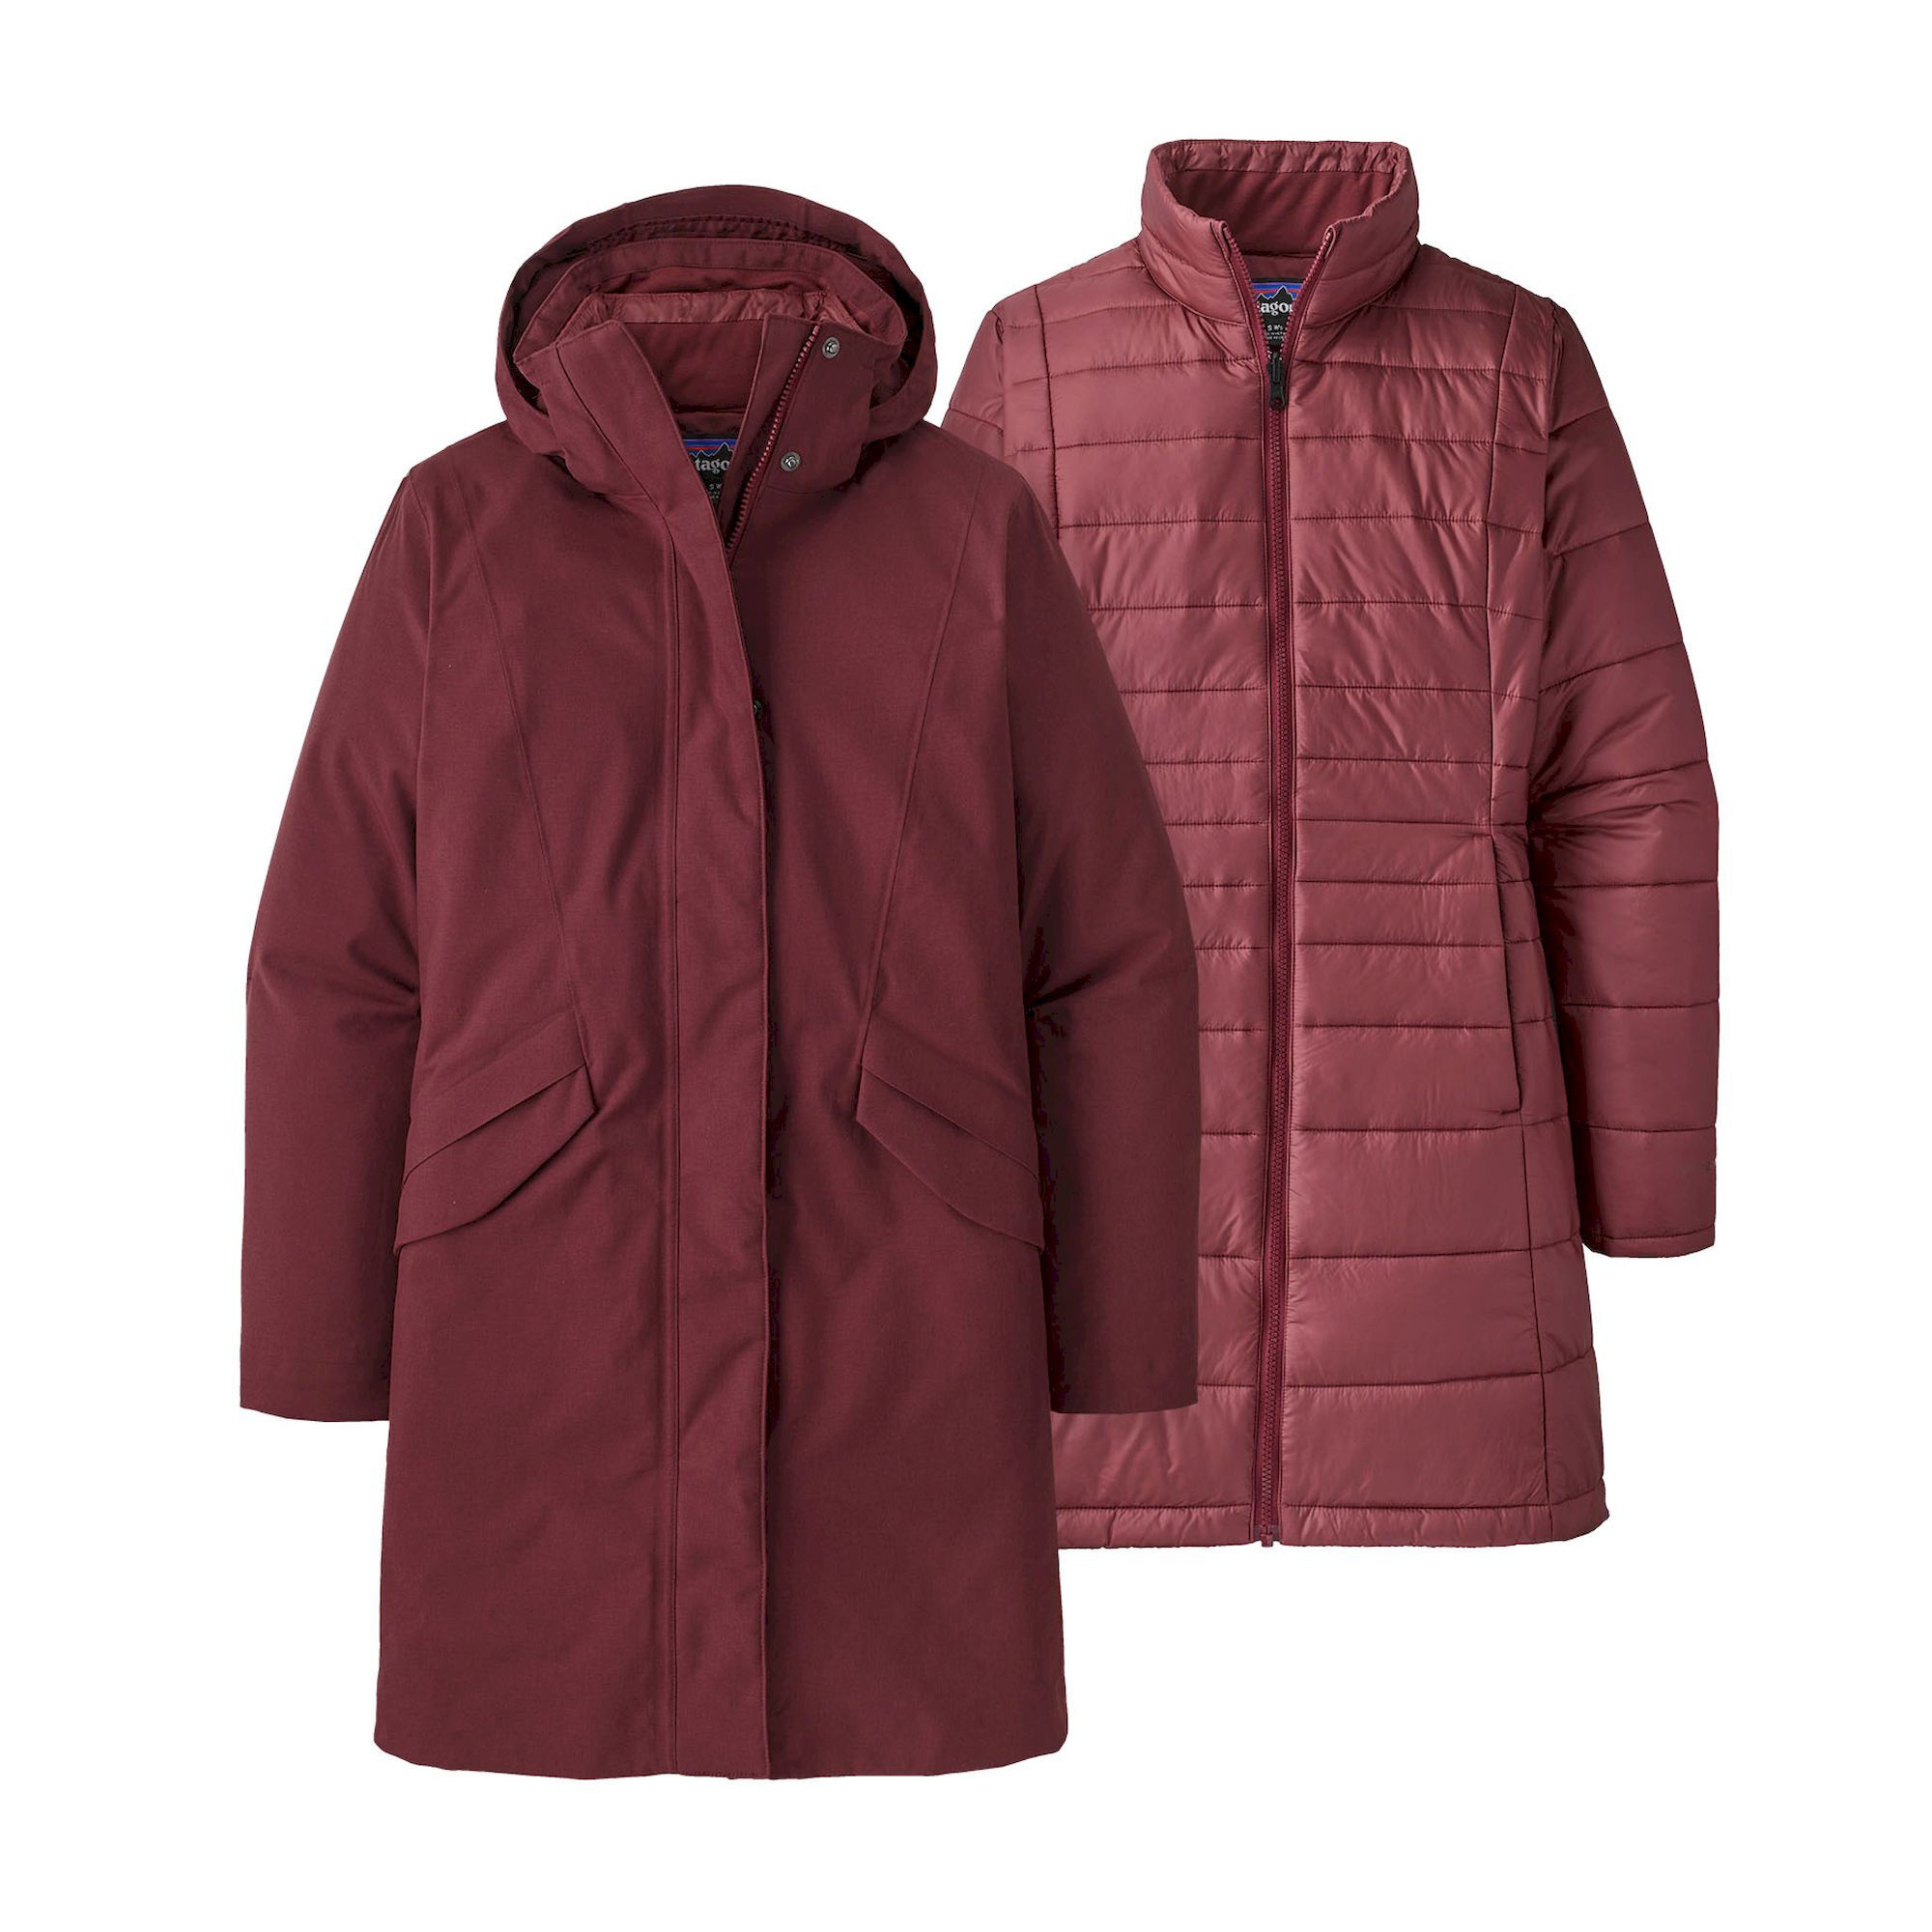 Patagonia - Vosque 3-in-1 Parka - 3-In-1 jacket - Mujer